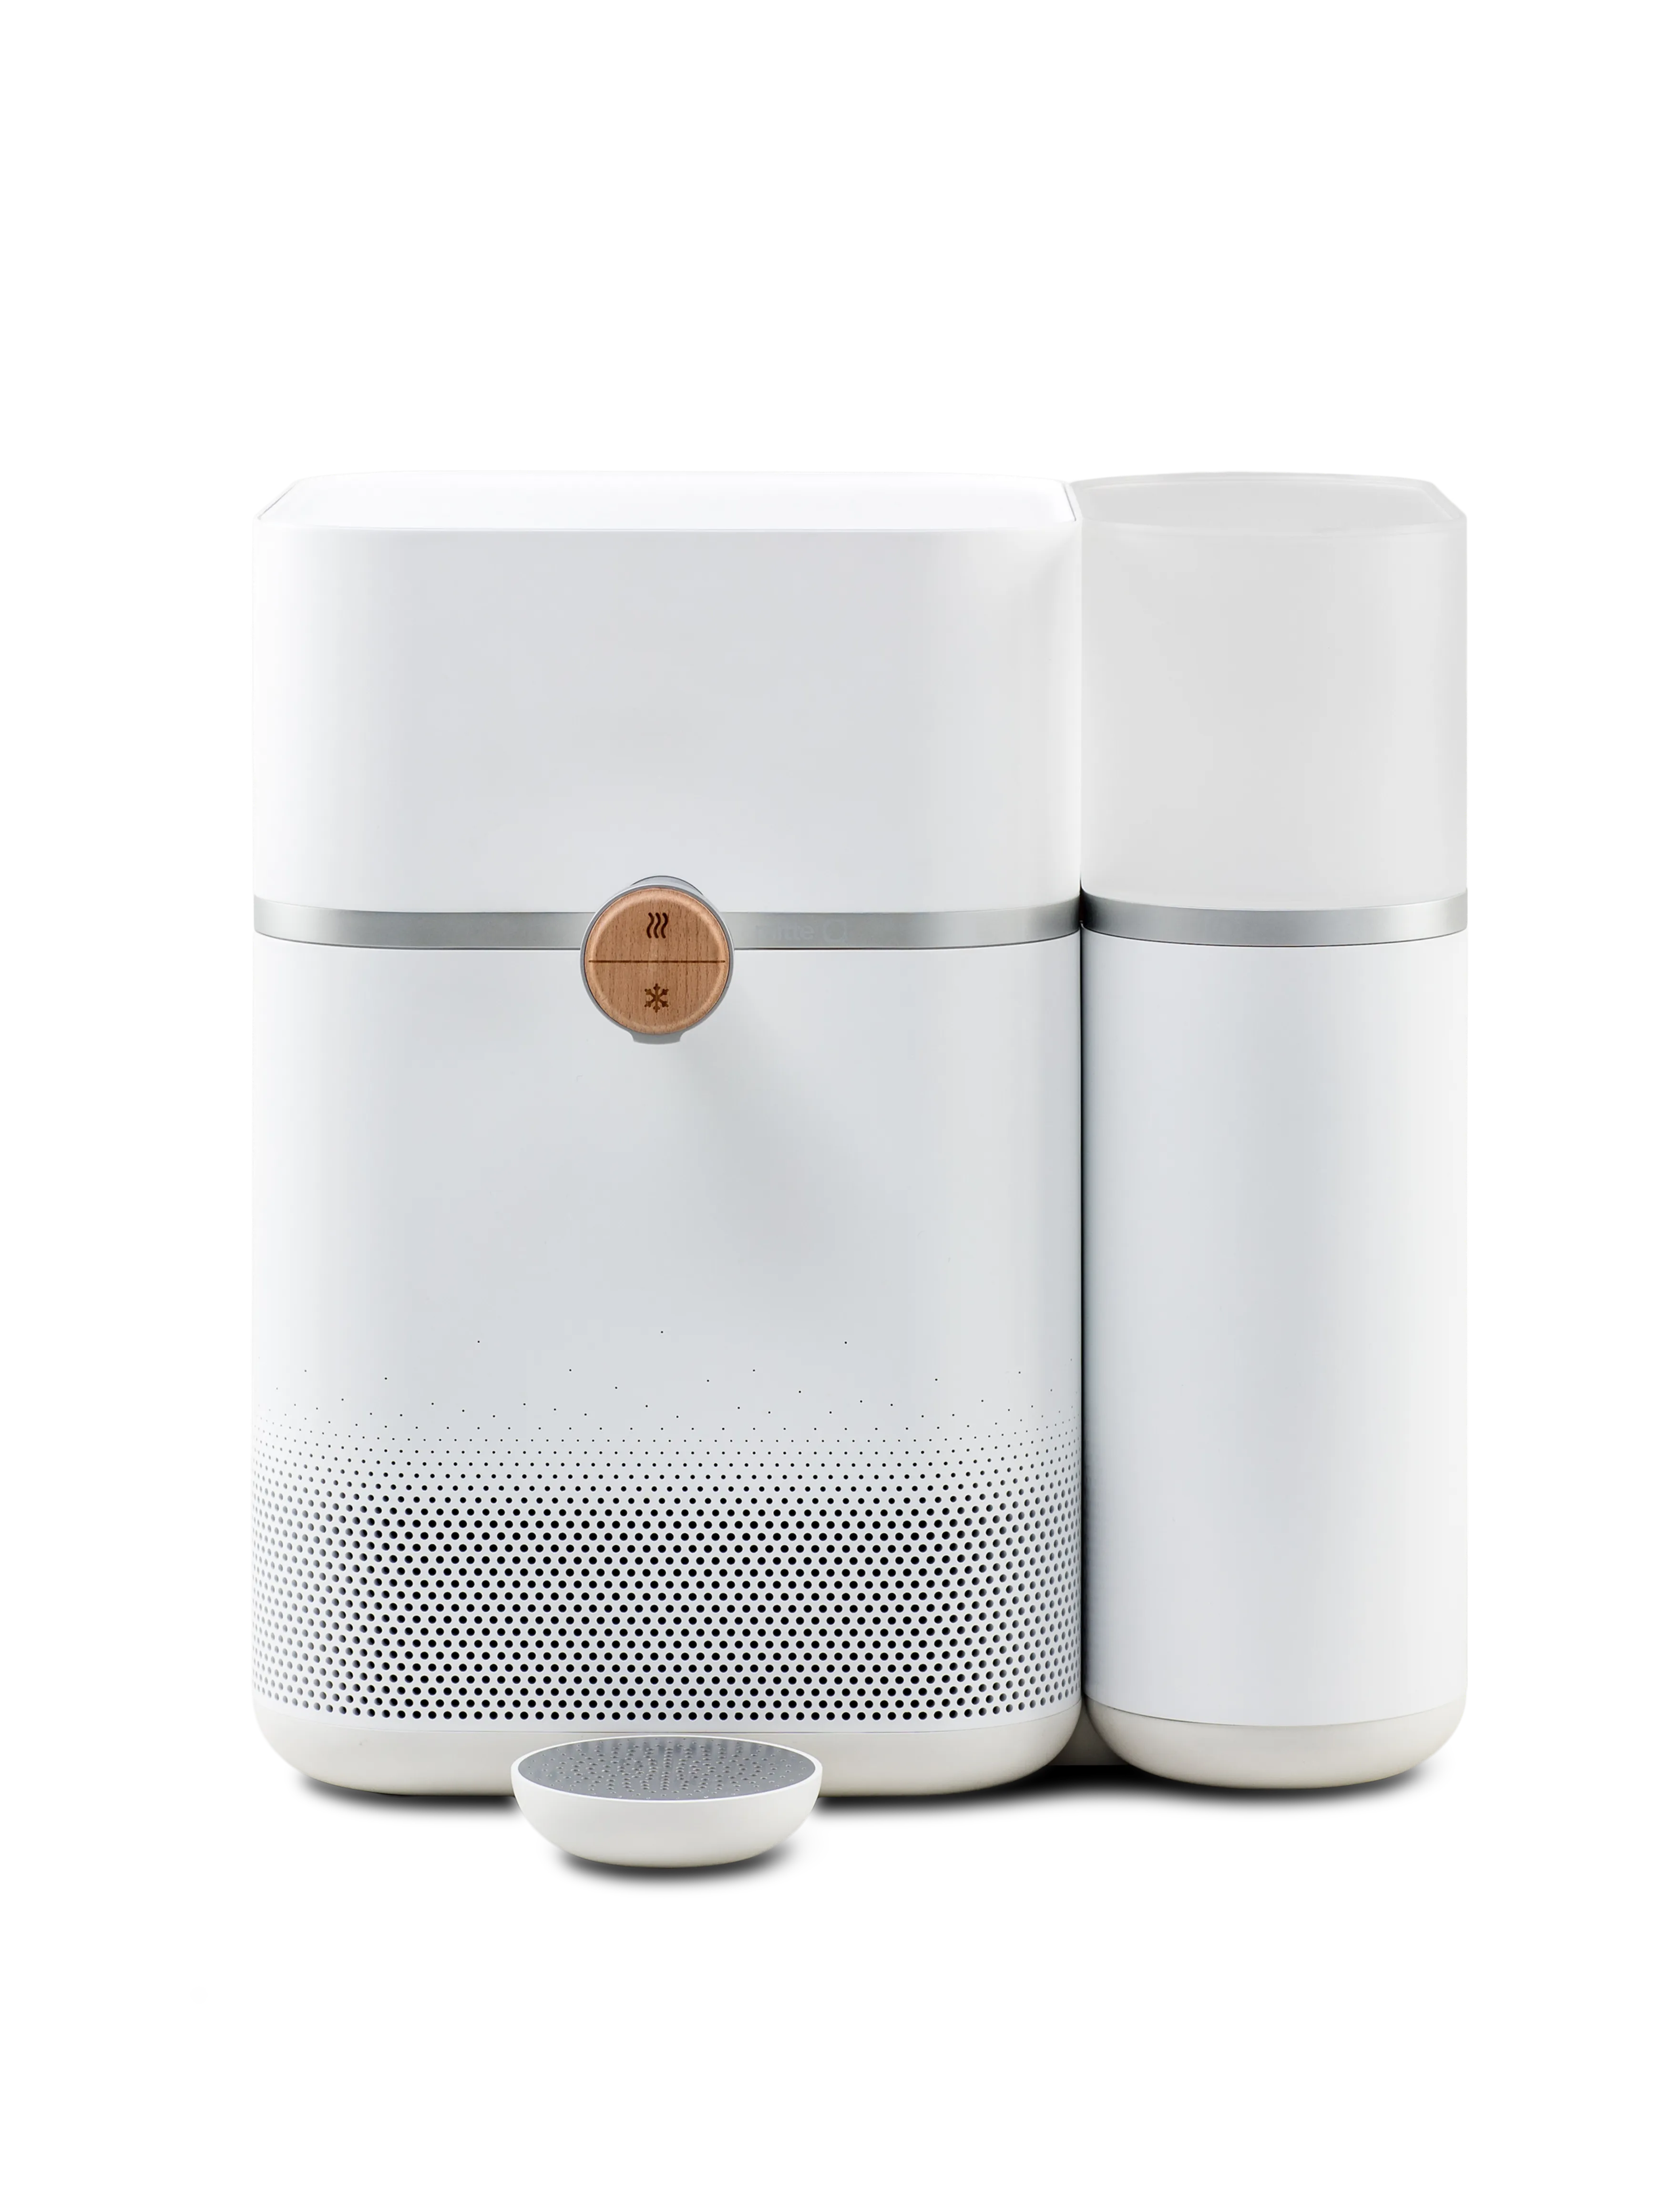 A frontal view of the Mitte water purifier in front of a transparent background